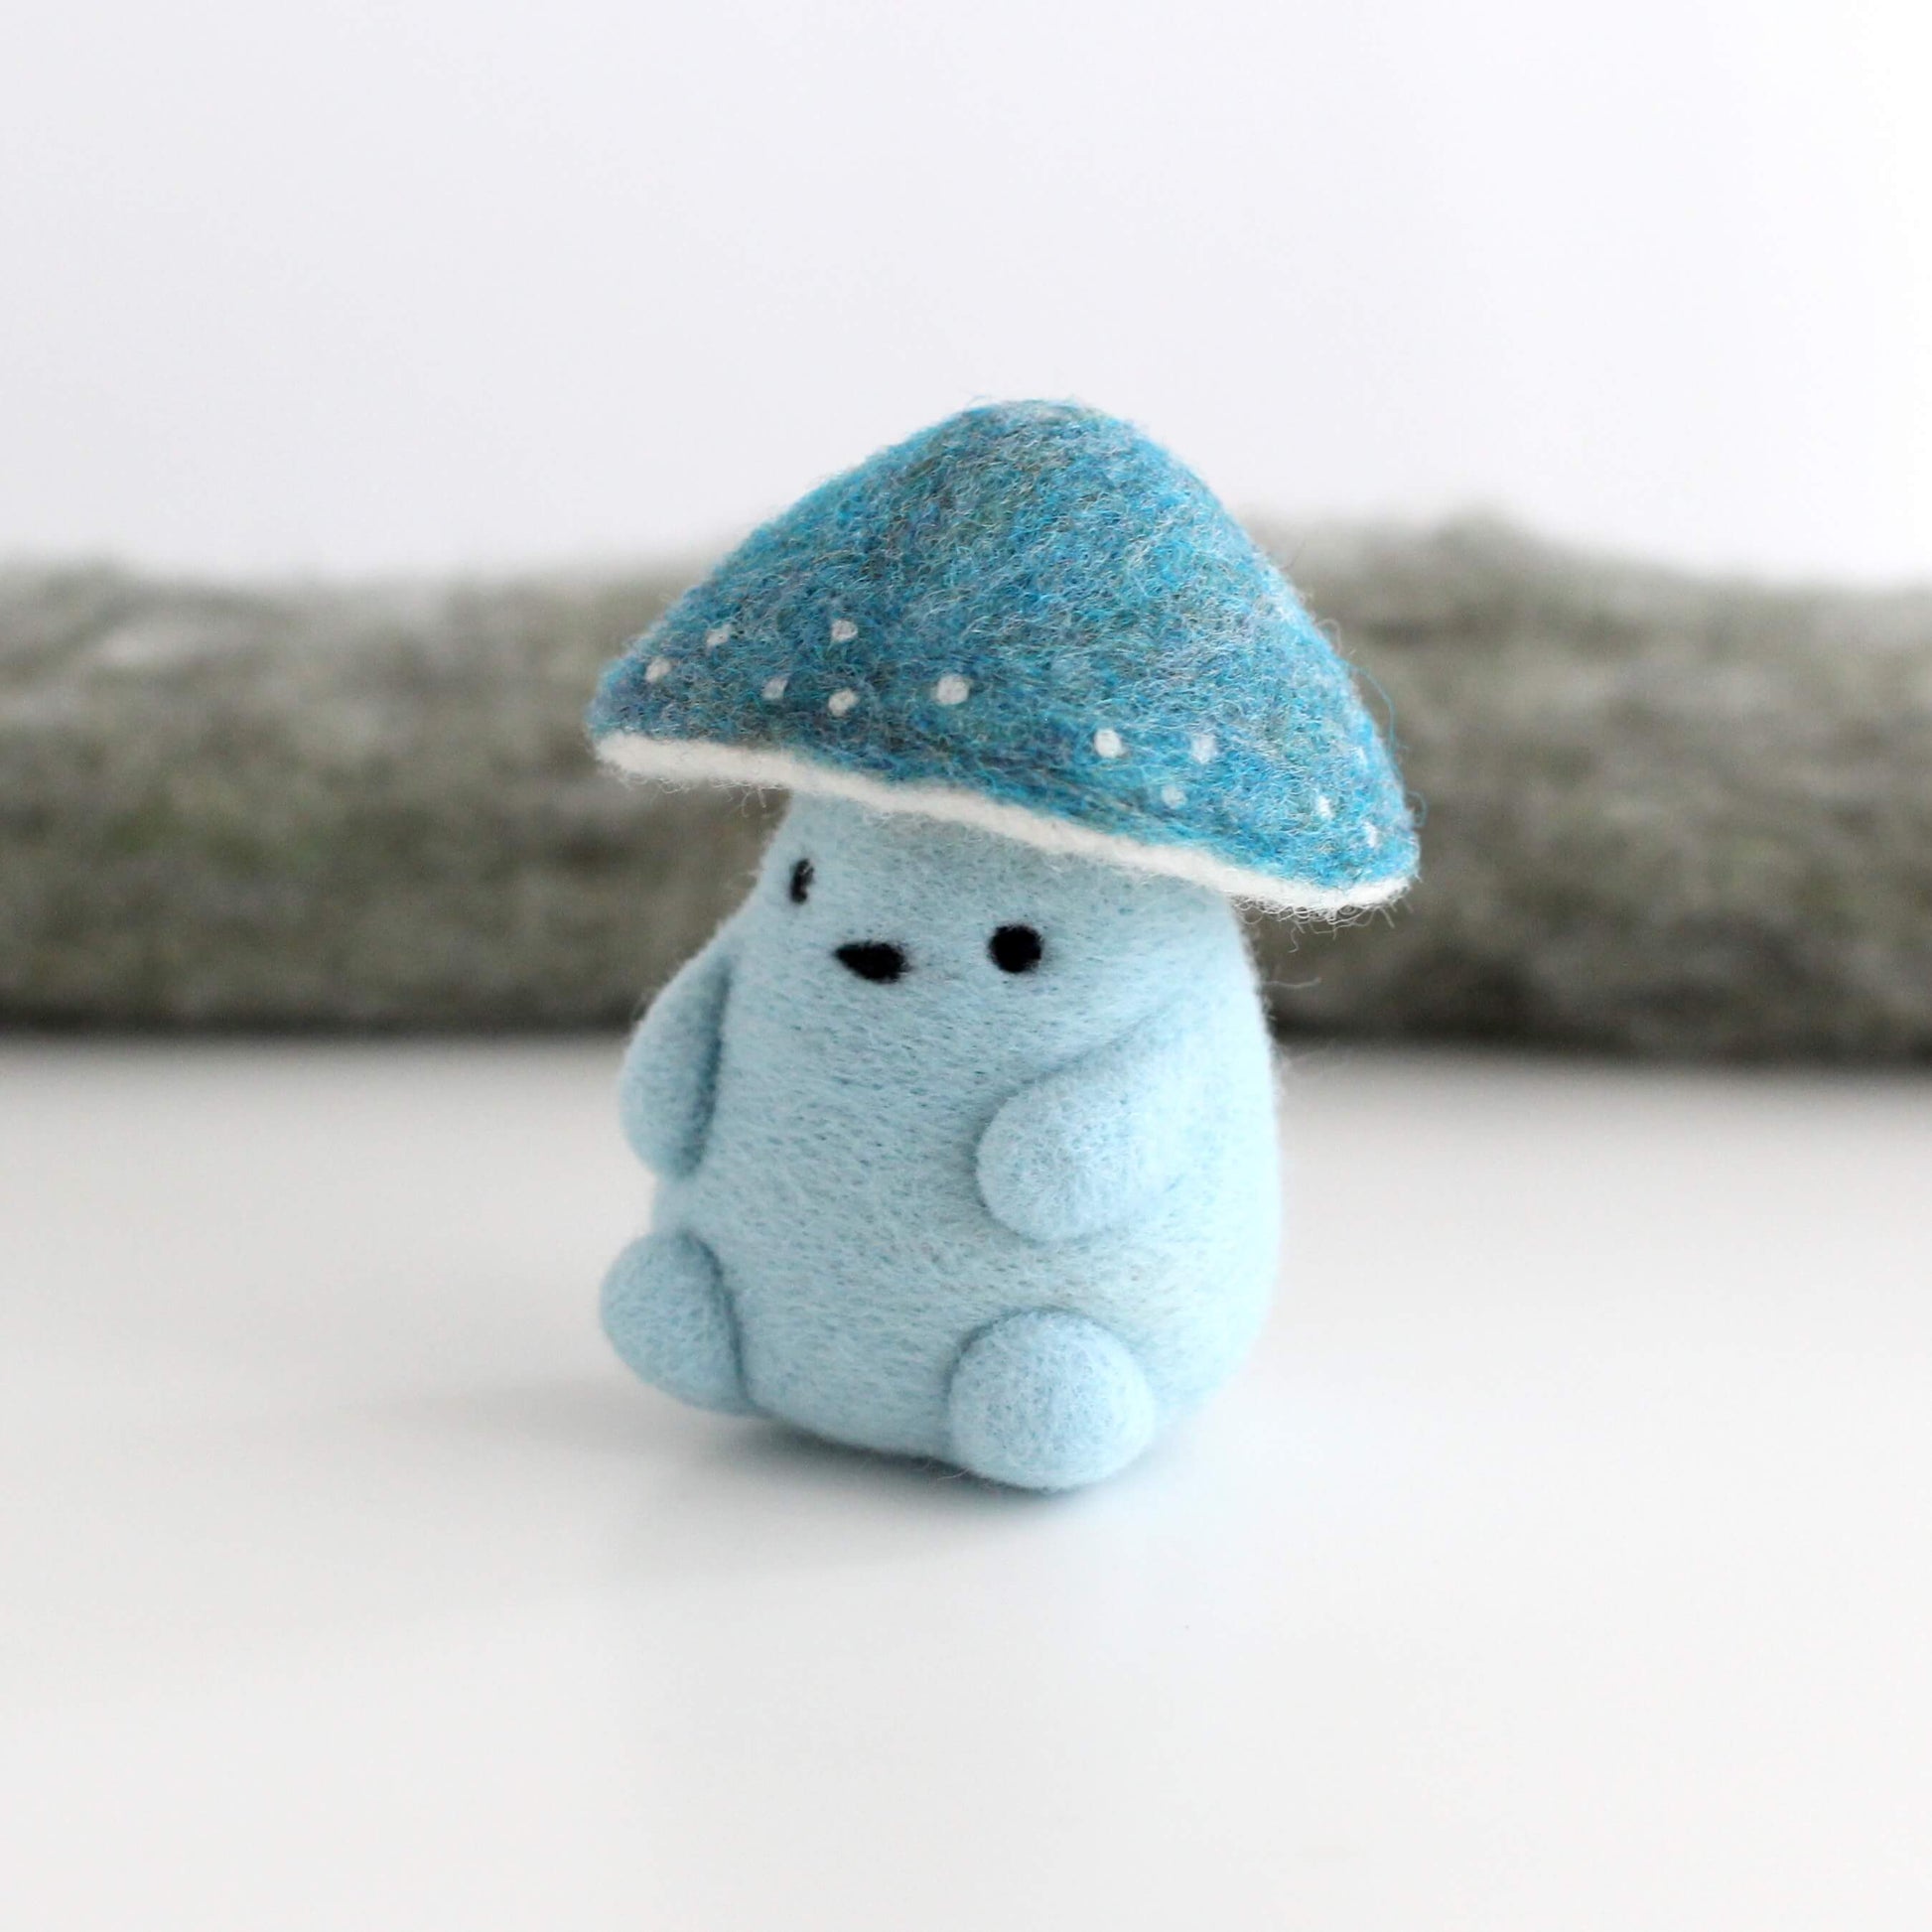 Needle Felted Blue Mushroom (Verdigris Agaric) by Wild Whimsy Woolies